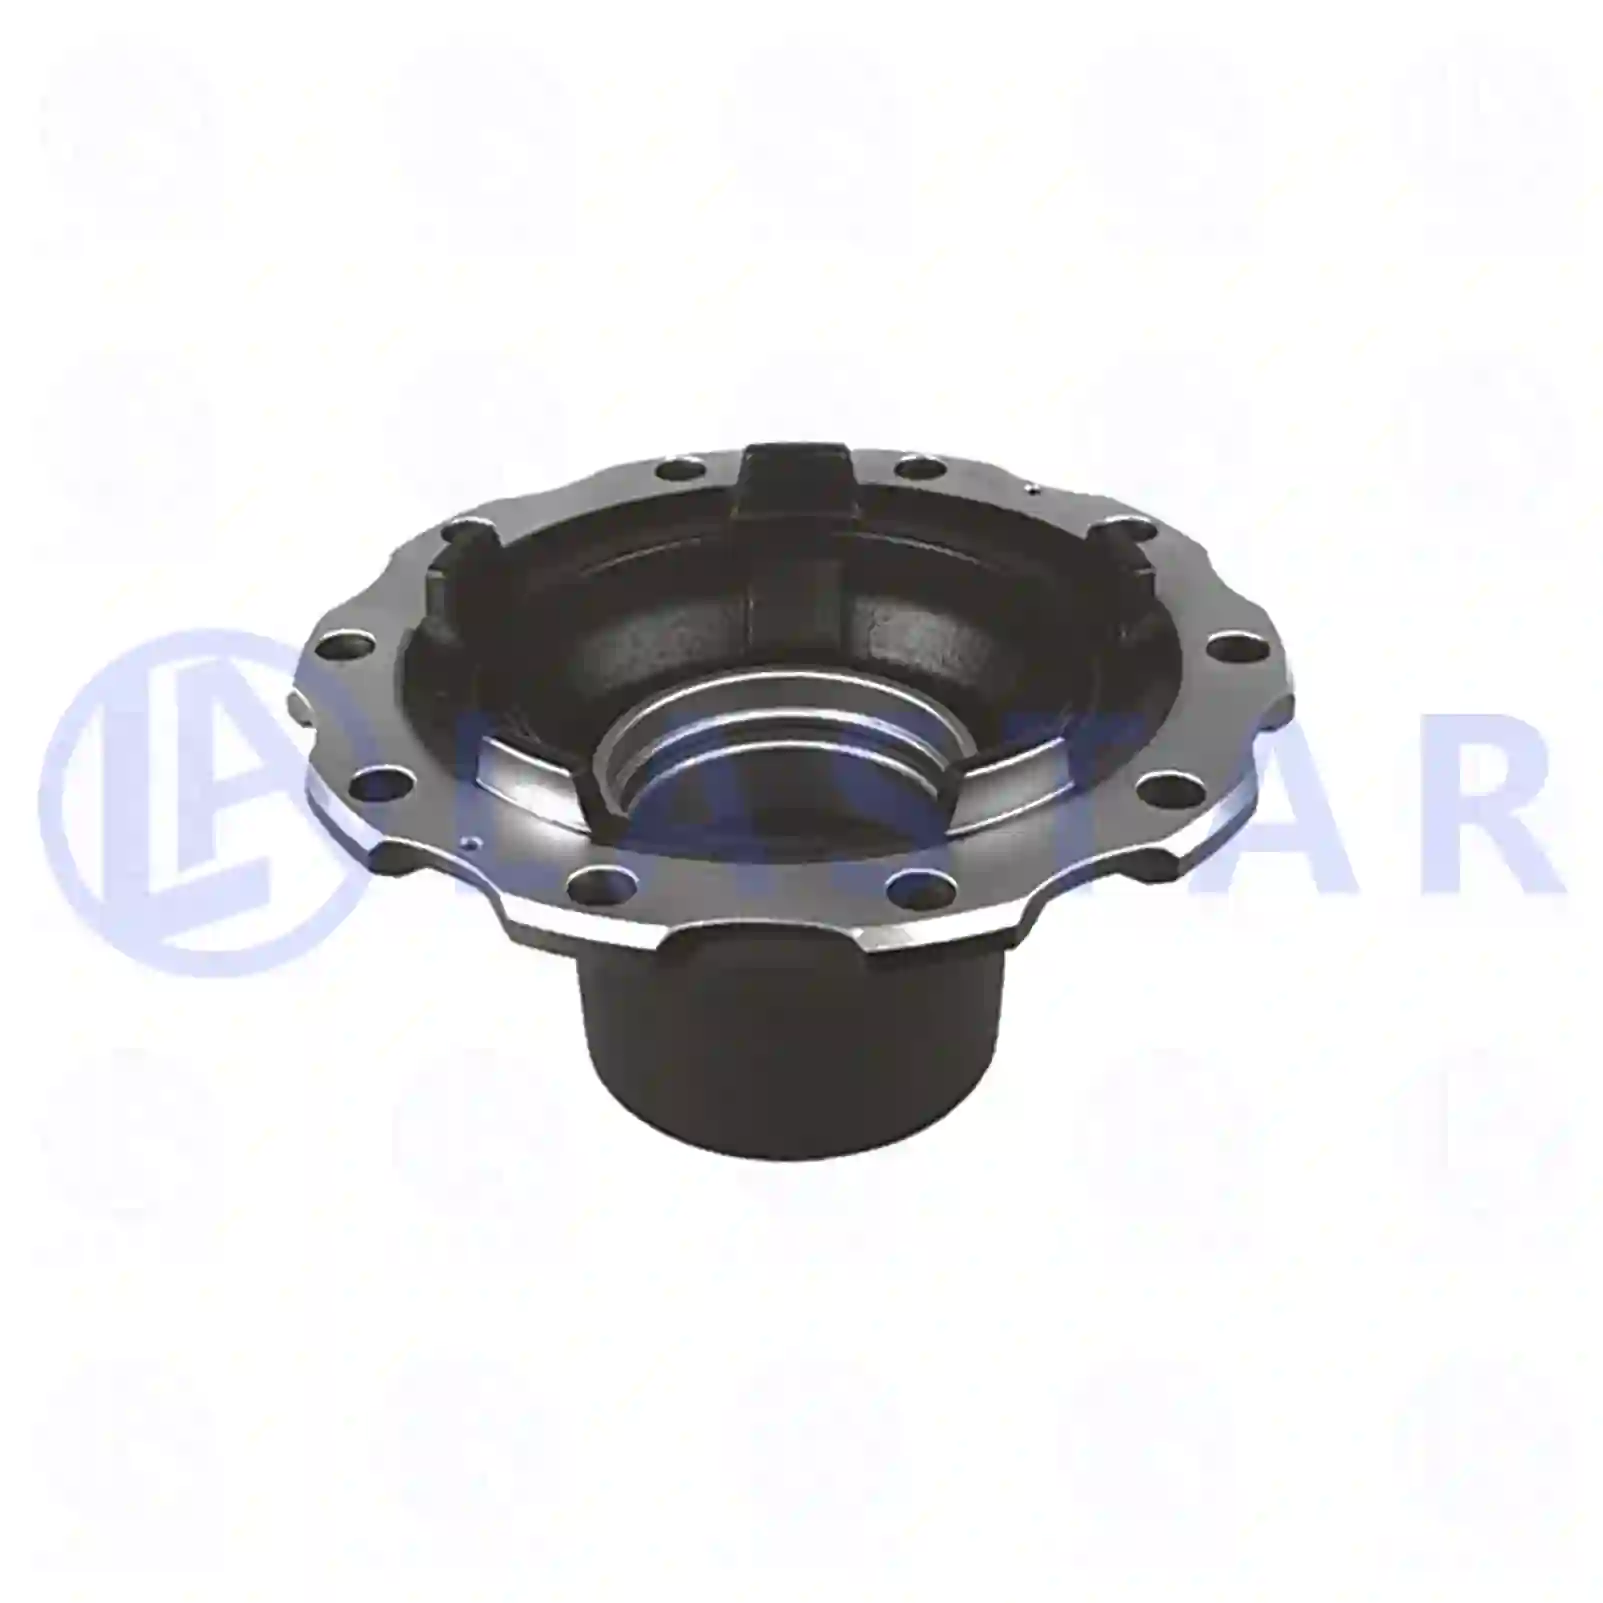 Wheel hub, with bearing, 77726955, 1414154S, 1724407S, ZG30201-0008, , , , ||  77726955 Lastar Spare Part | Truck Spare Parts, Auotomotive Spare Parts Wheel hub, with bearing, 77726955, 1414154S, 1724407S, ZG30201-0008, , , , ||  77726955 Lastar Spare Part | Truck Spare Parts, Auotomotive Spare Parts